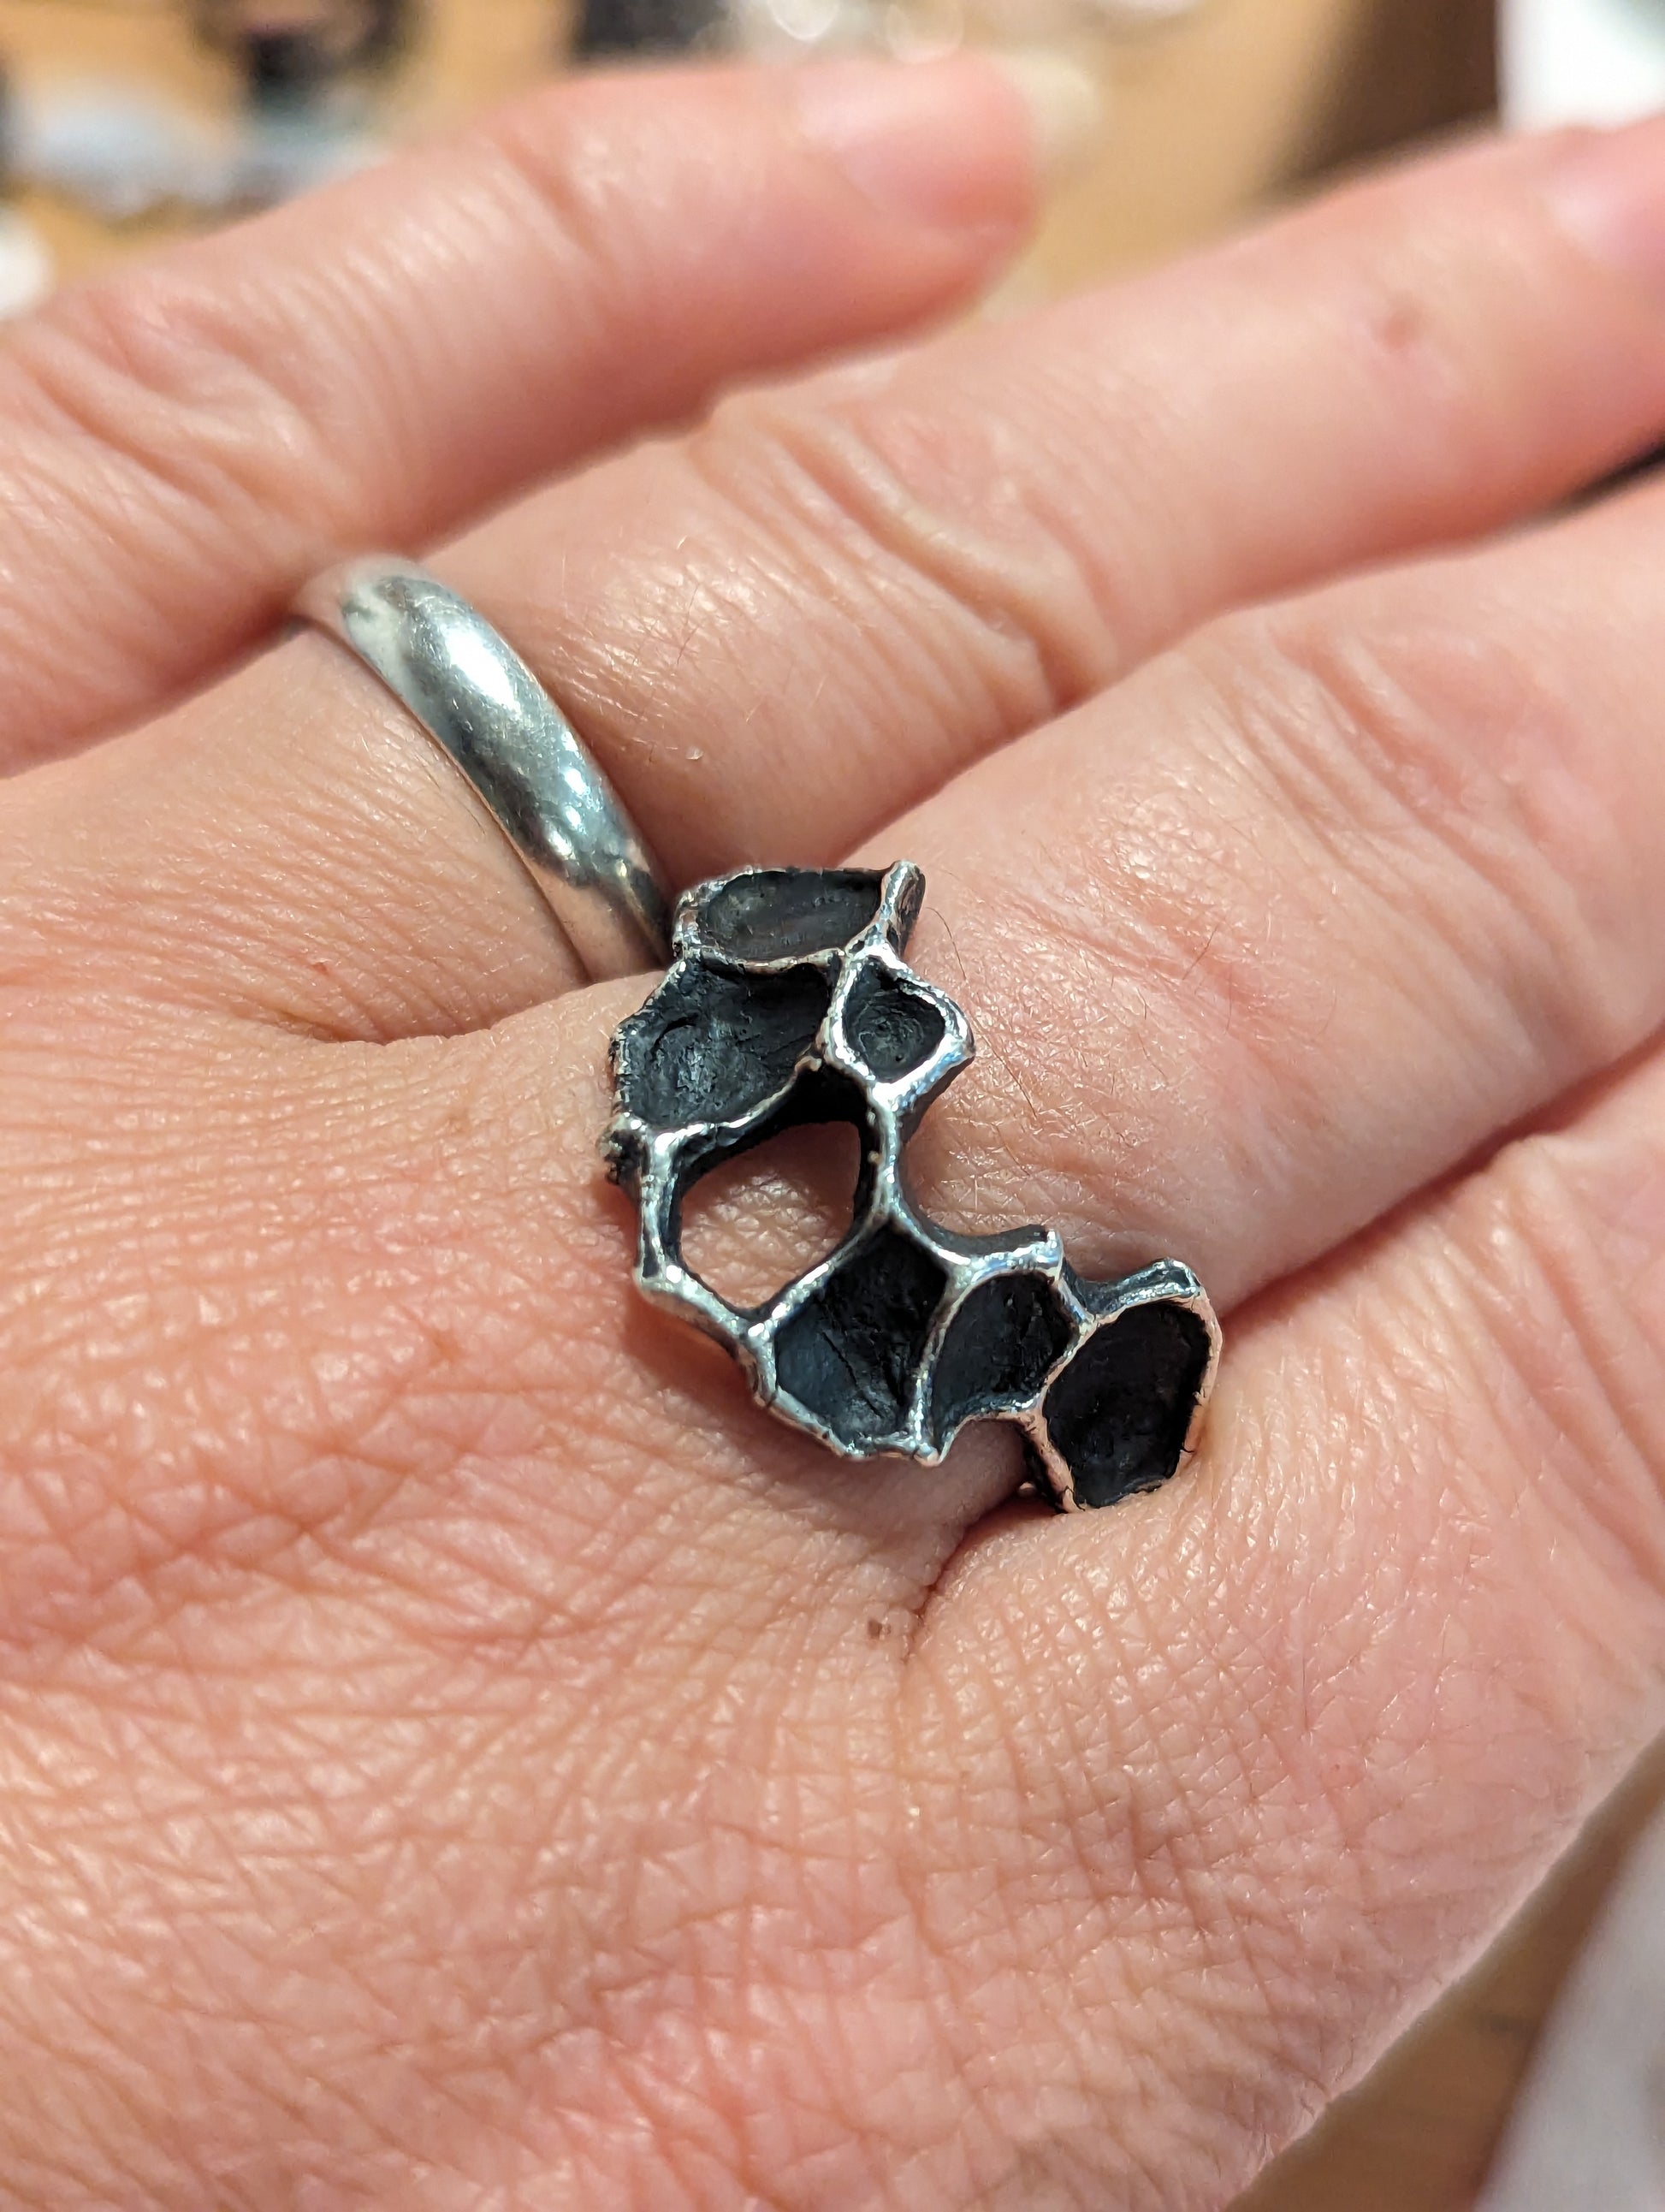 Pomegranate ring with turquiose or black patina.-Beca Beeby